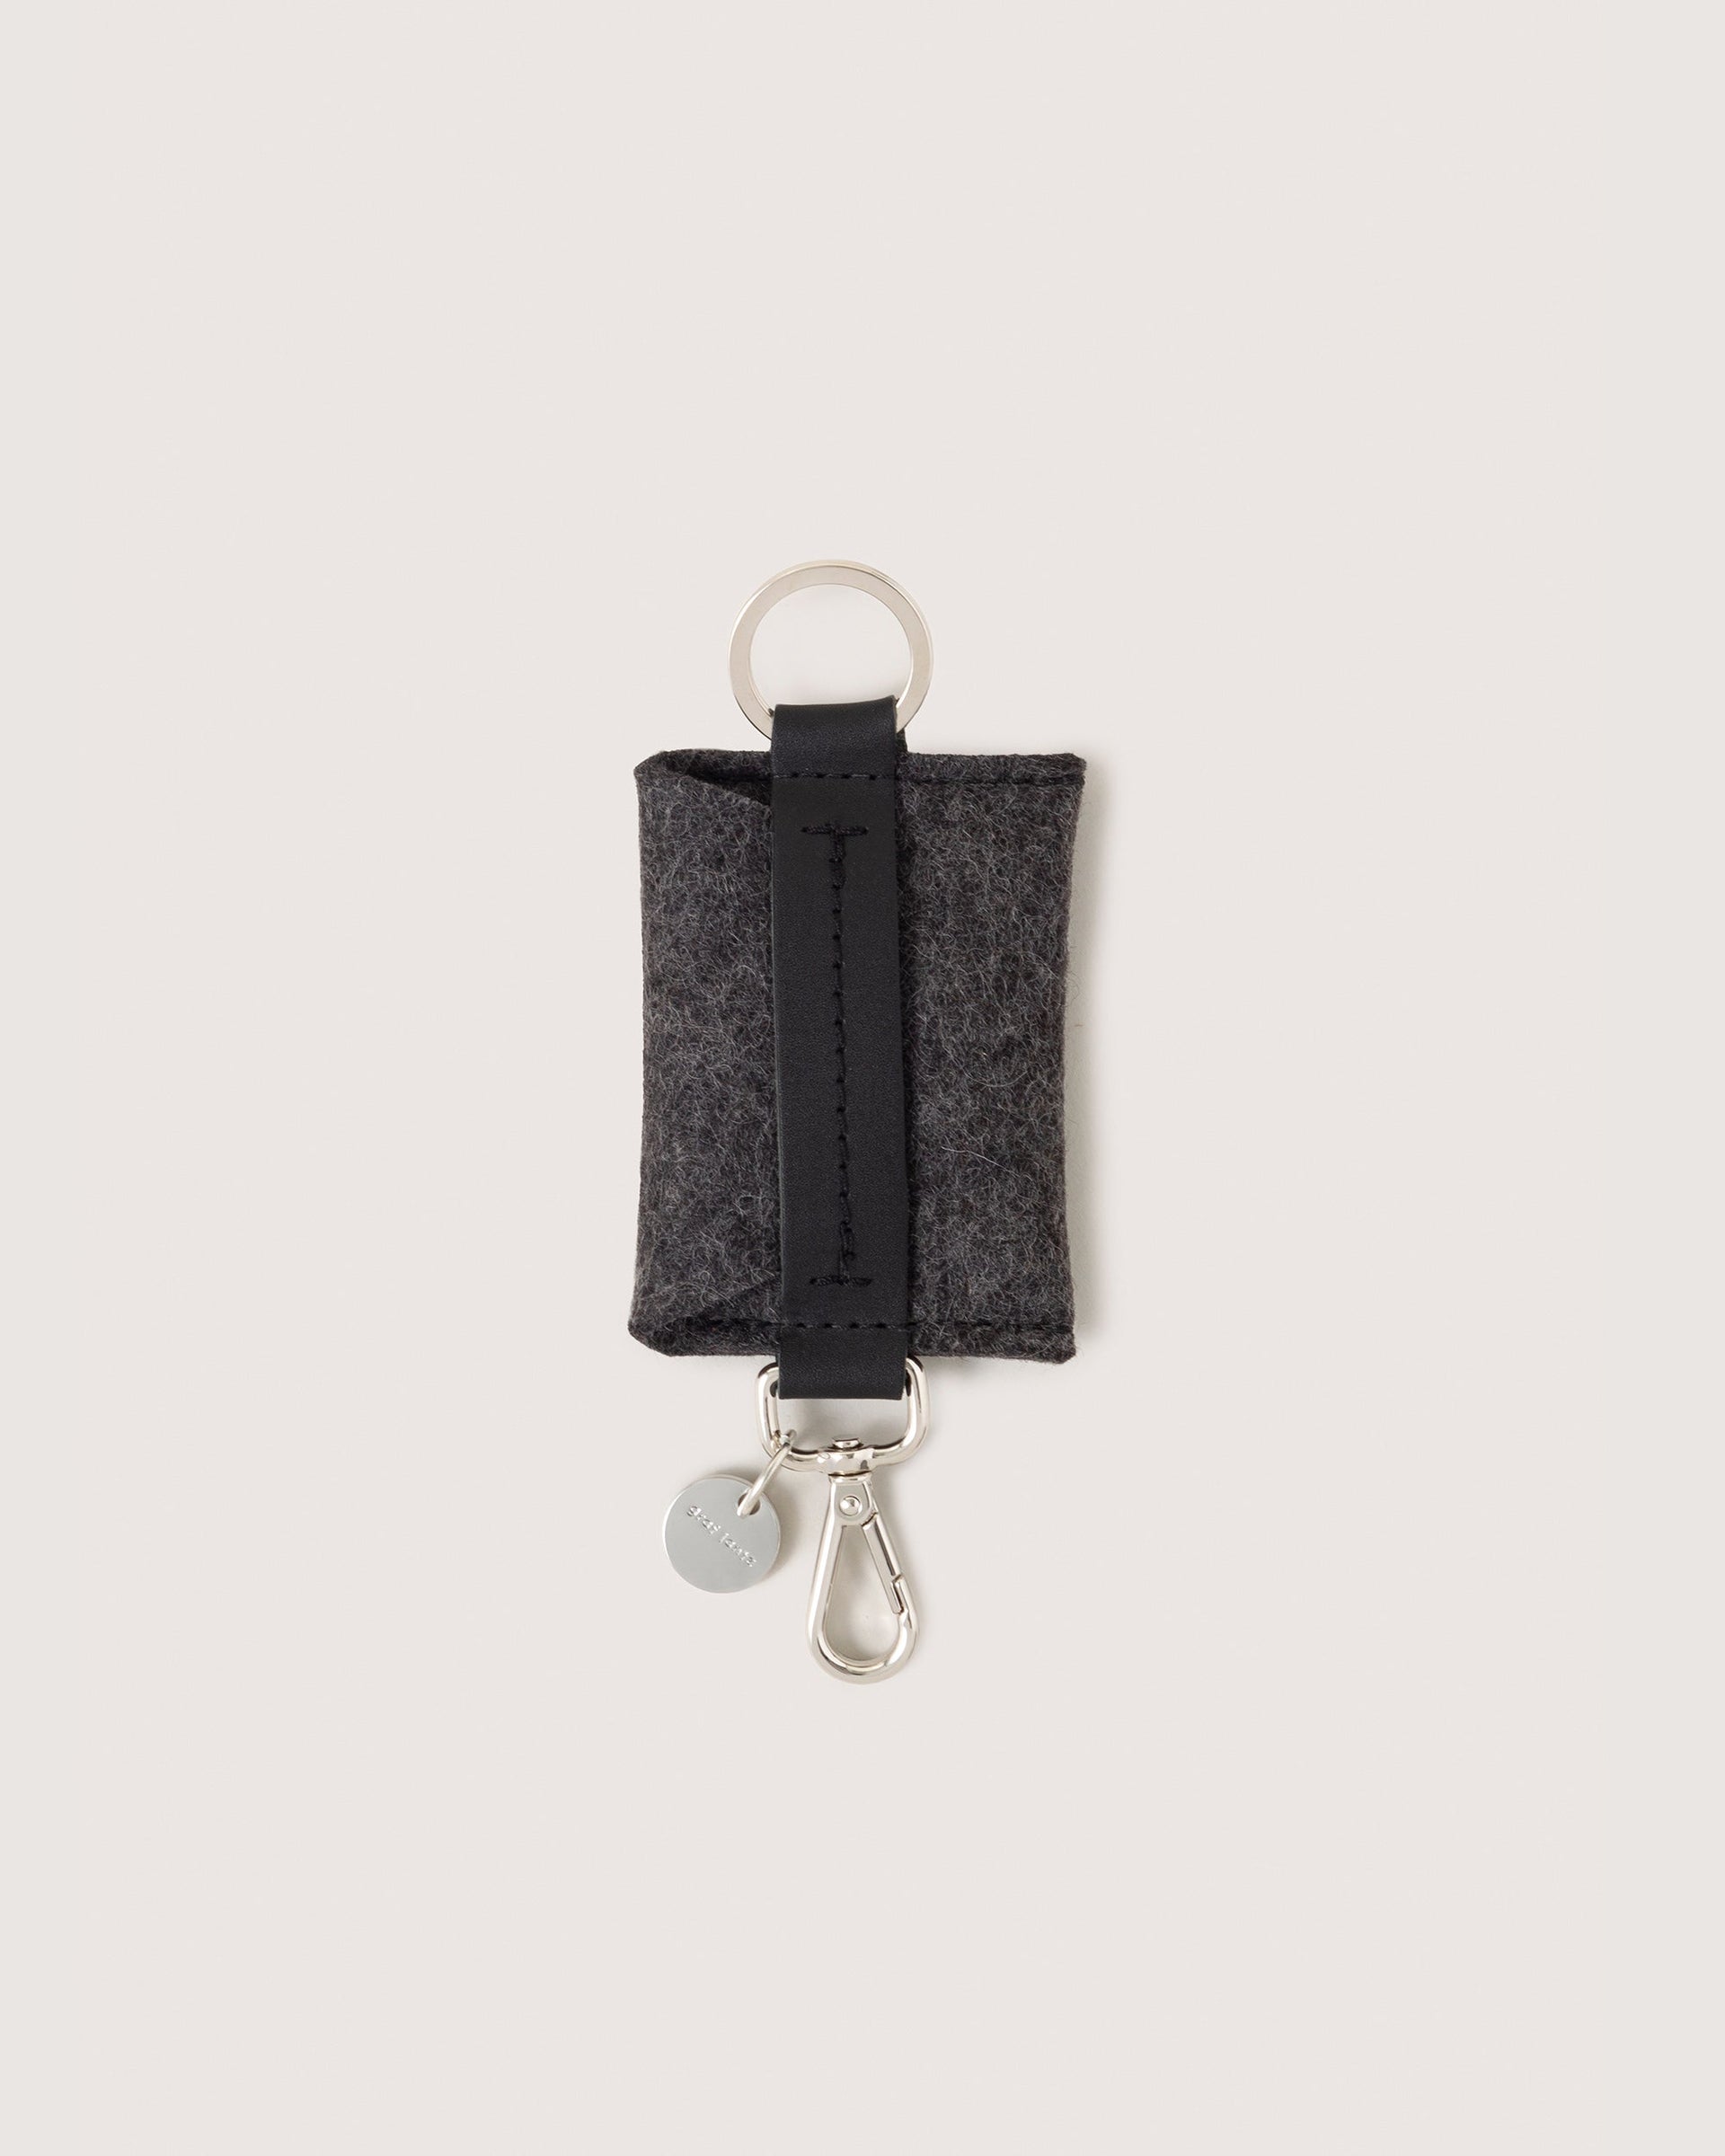 Charcoal Merino Wool Card Key Fob with silver colored Lobster Clasp, Flat Wide Keyring, and Logo Tog Tag, white background.